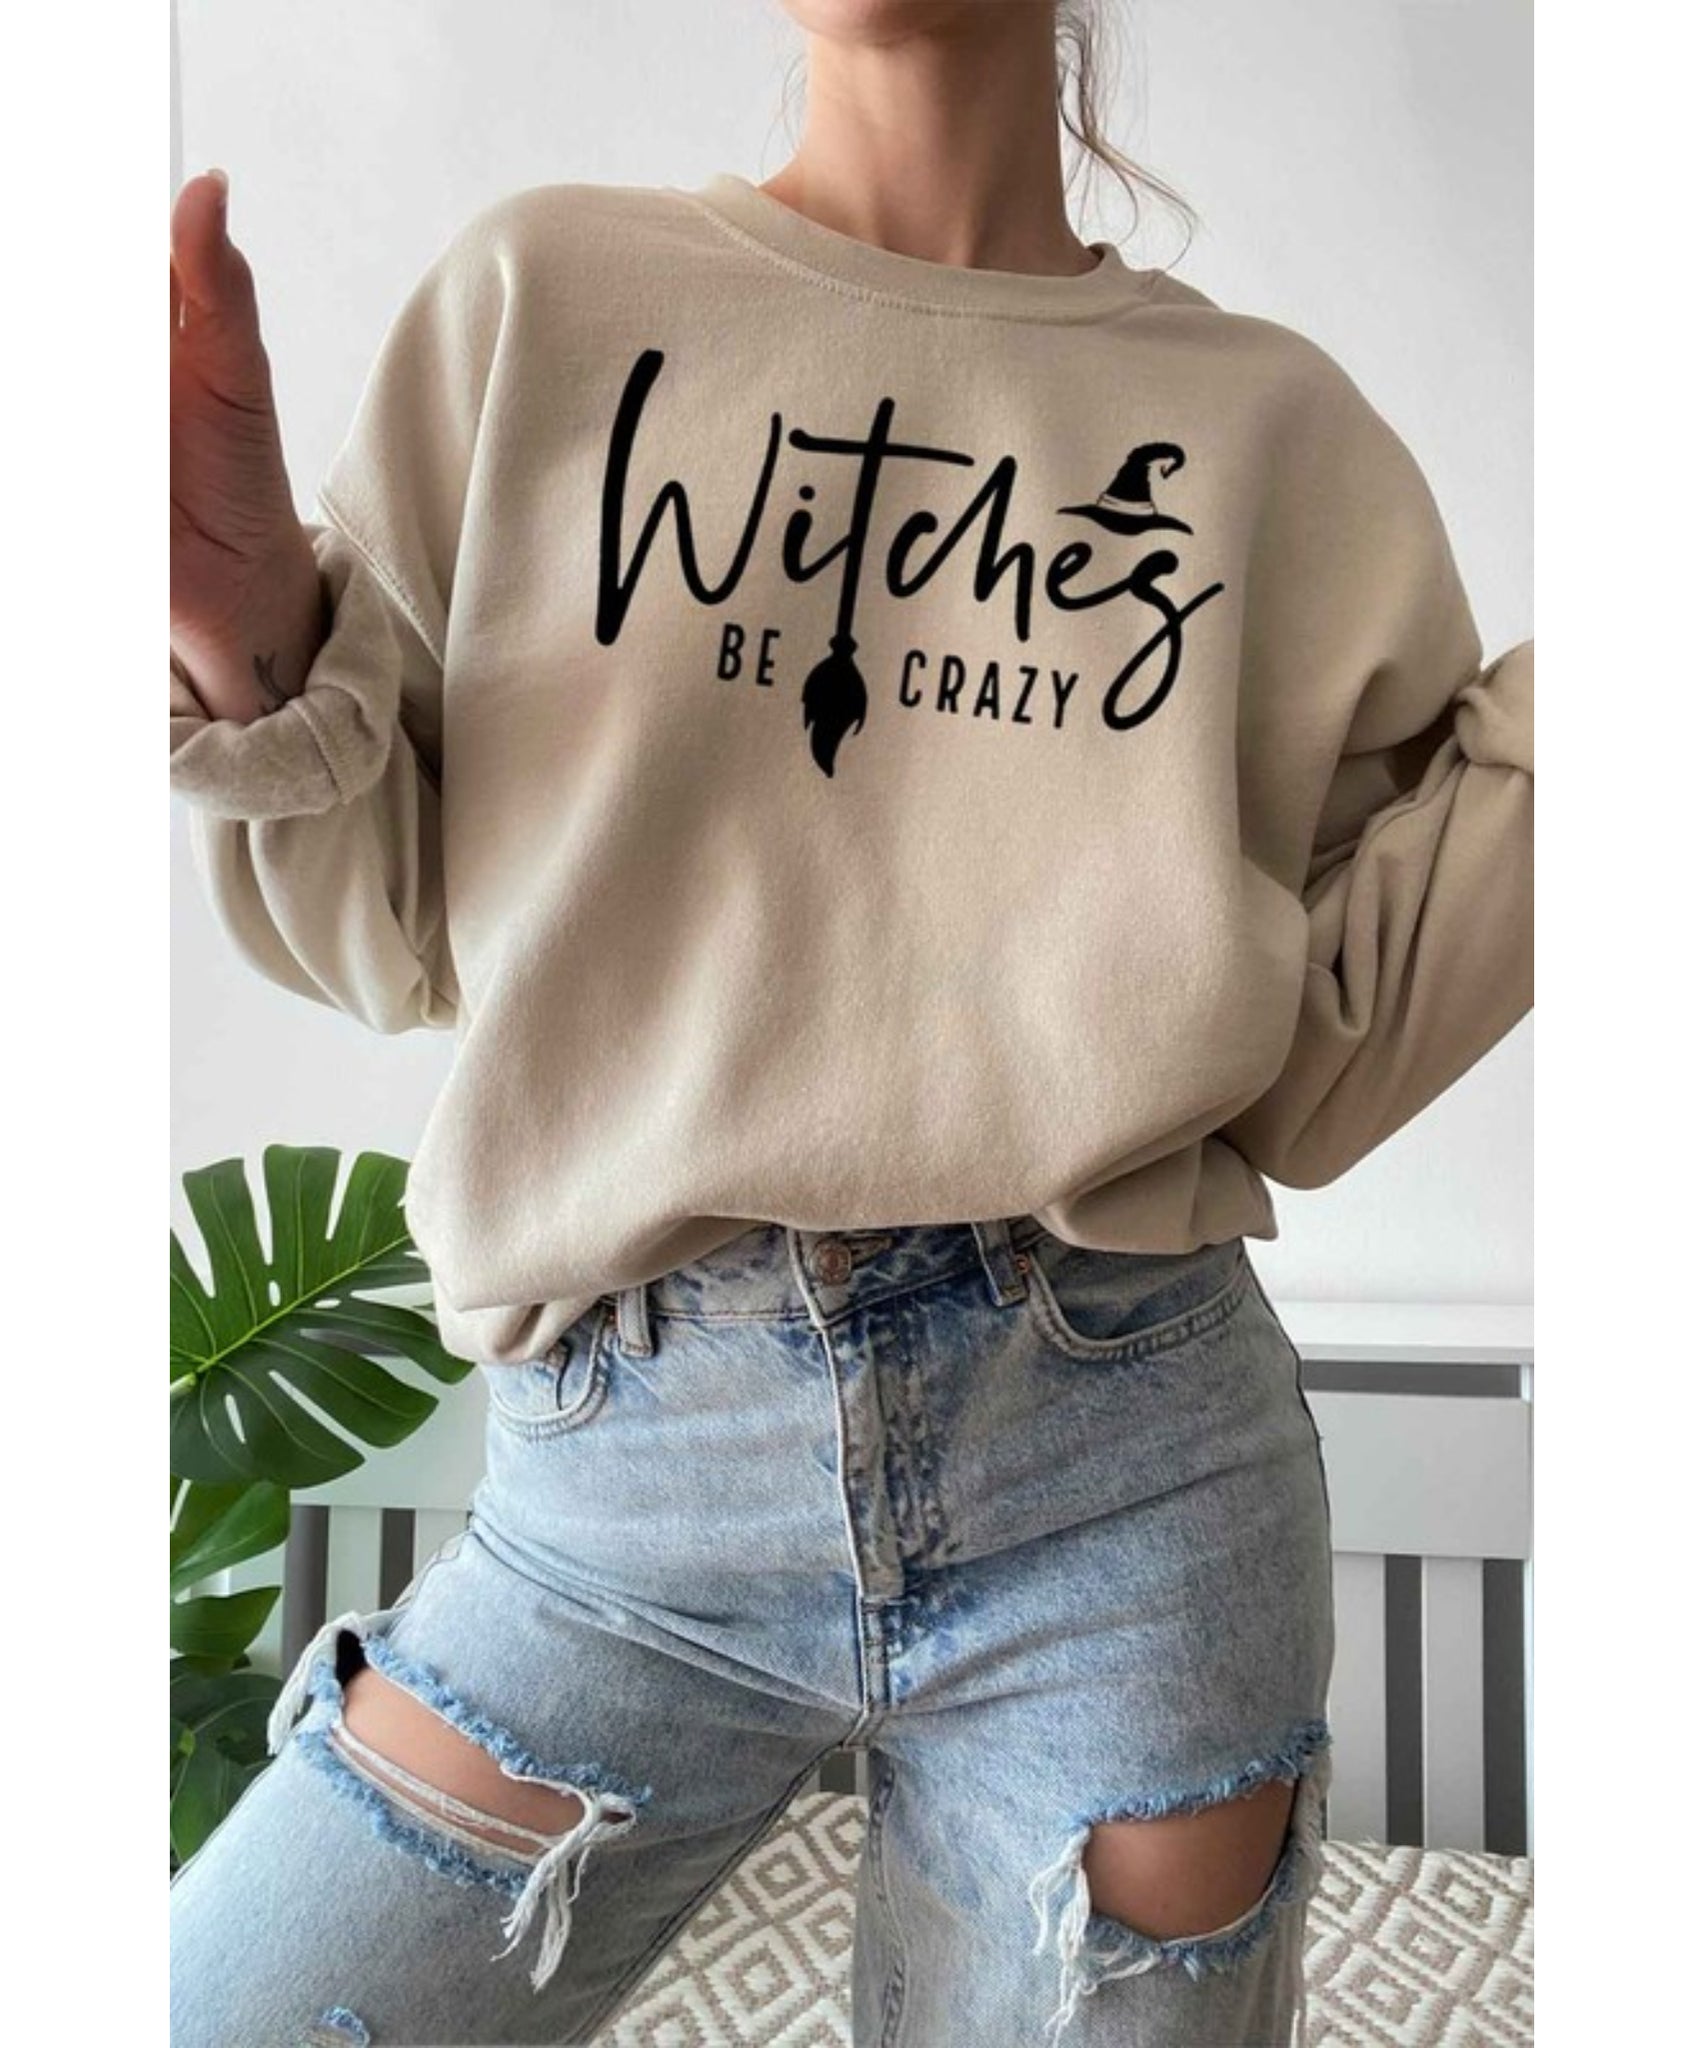 Witches Be Crazy Graphic Sweatshirt